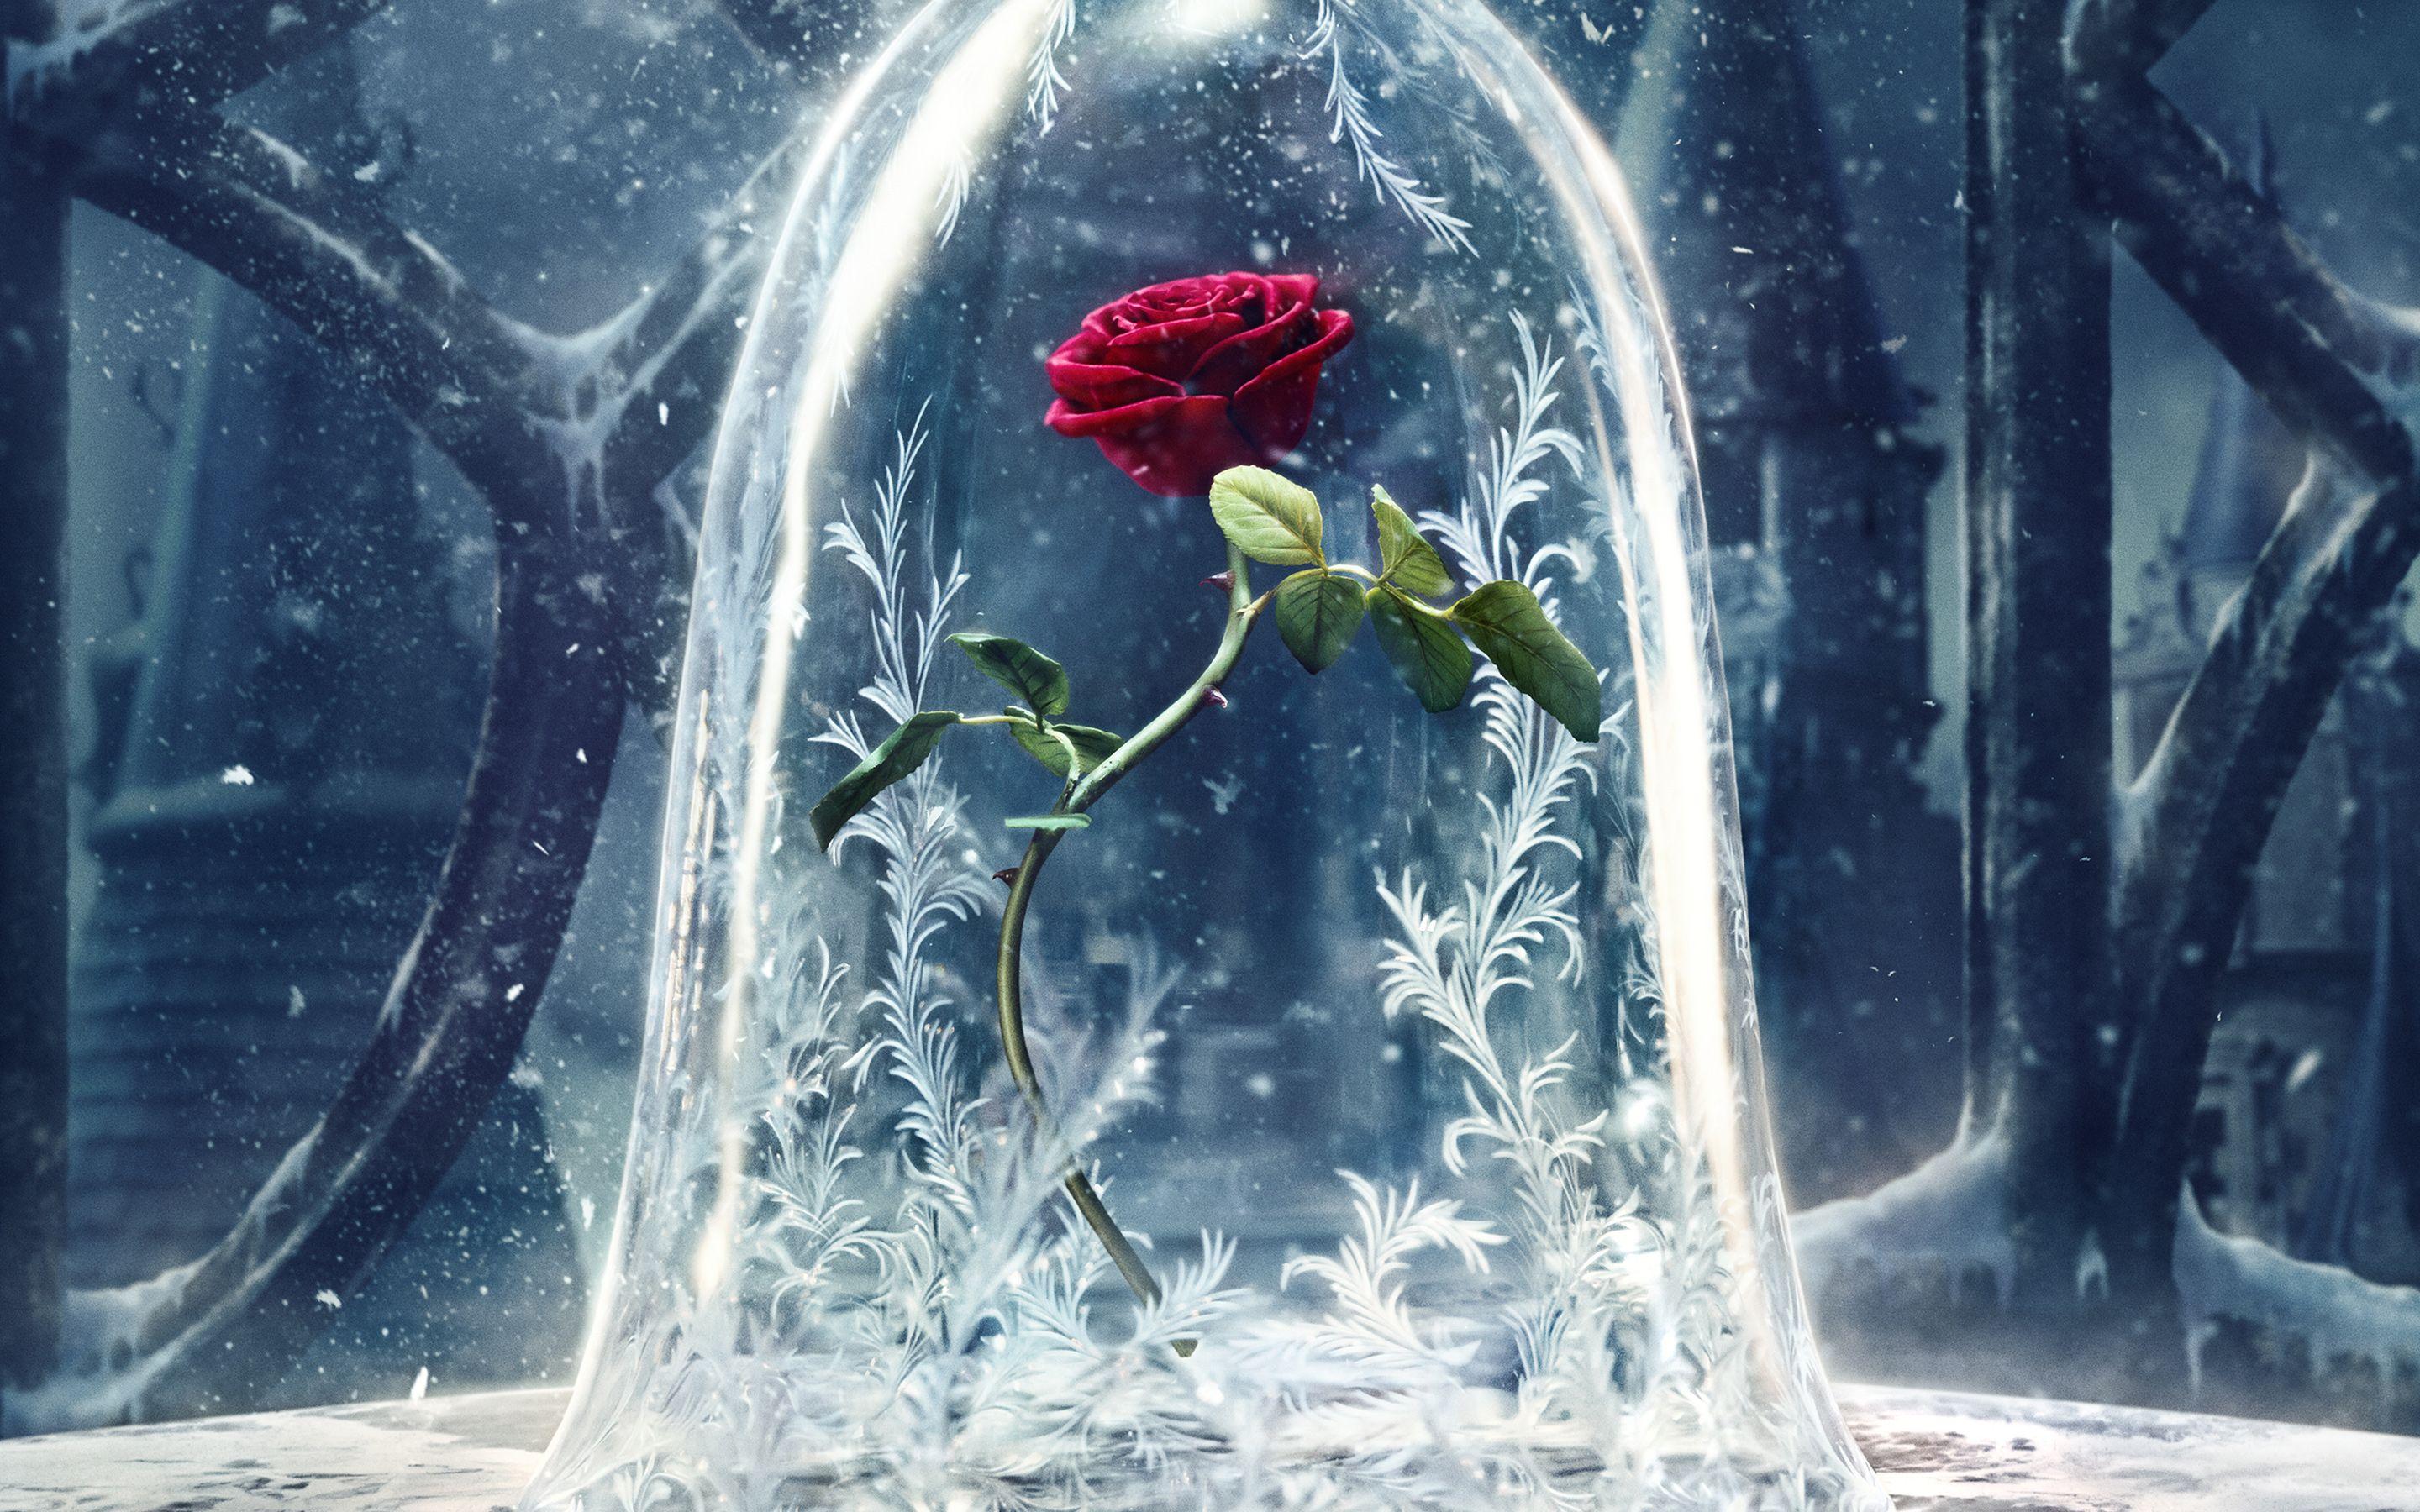 Beauty and the Beast 2017 Wallpaper